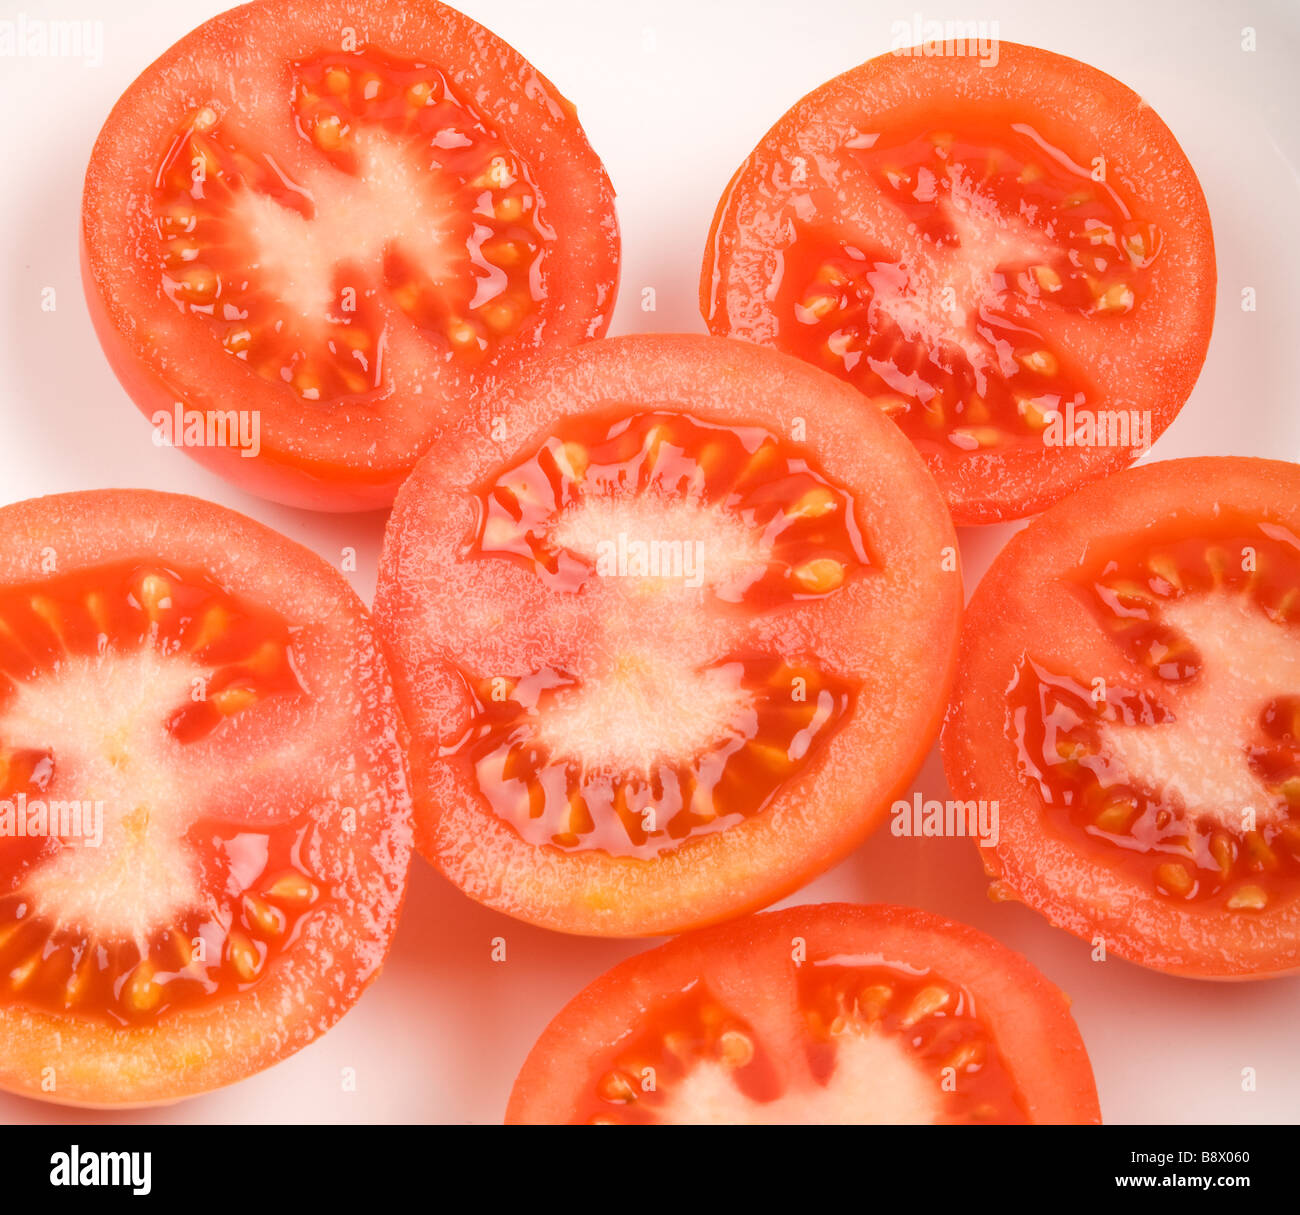 A close up shot of a cross section of several fresh red tomatoes Stock Photo